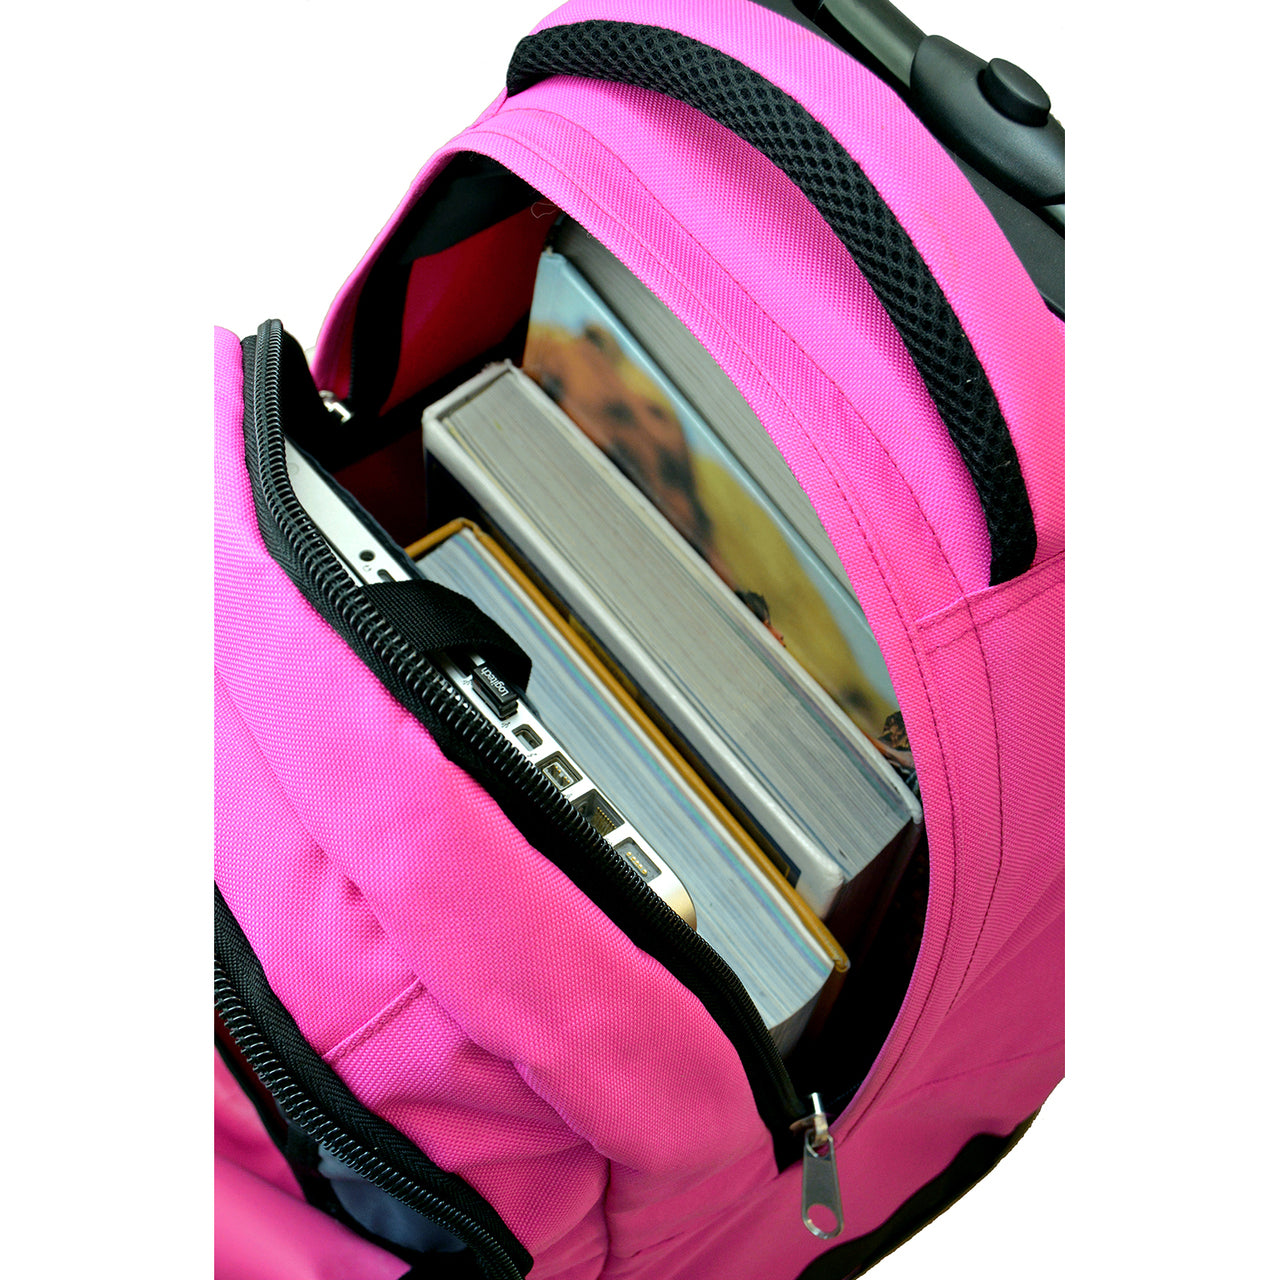 Miami Heat Premium Wheeled Backpack in Pink